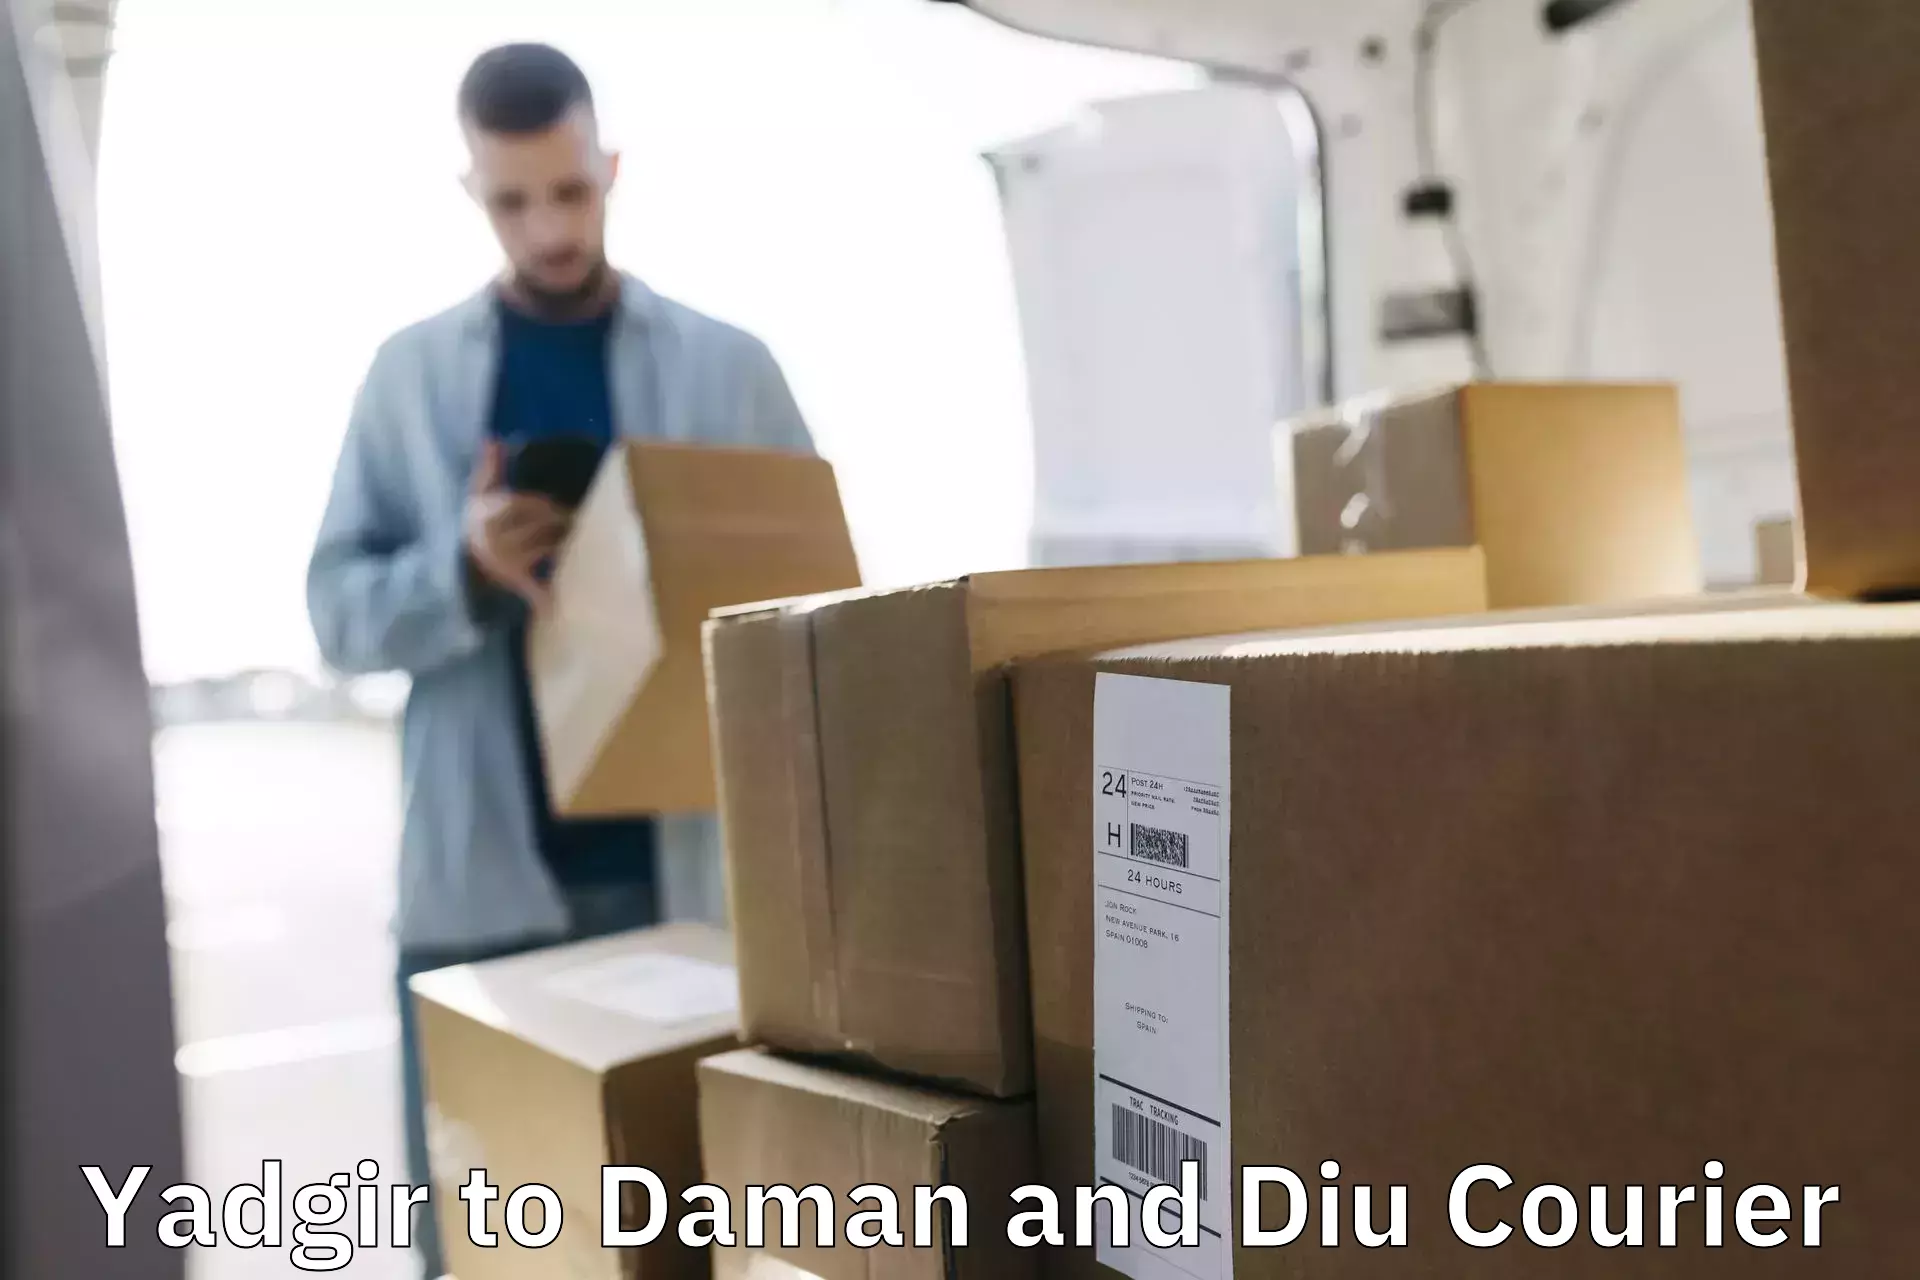 International courier networks Yadgir to Daman and Diu